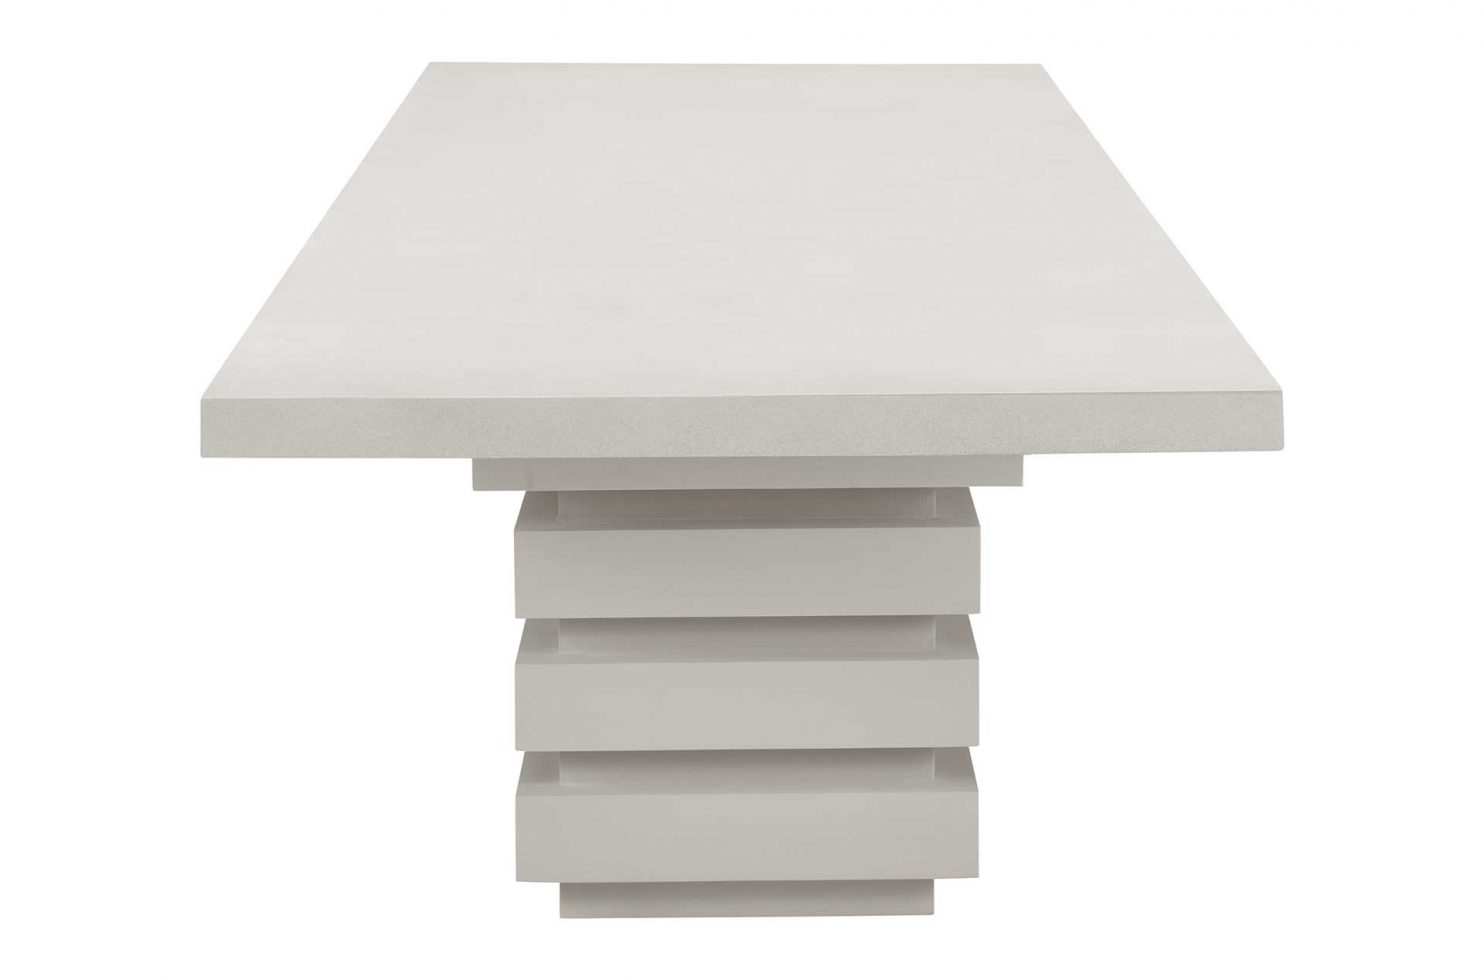 prov frp meditation rectangle dining table 108in limestone S1567134772 1 side web